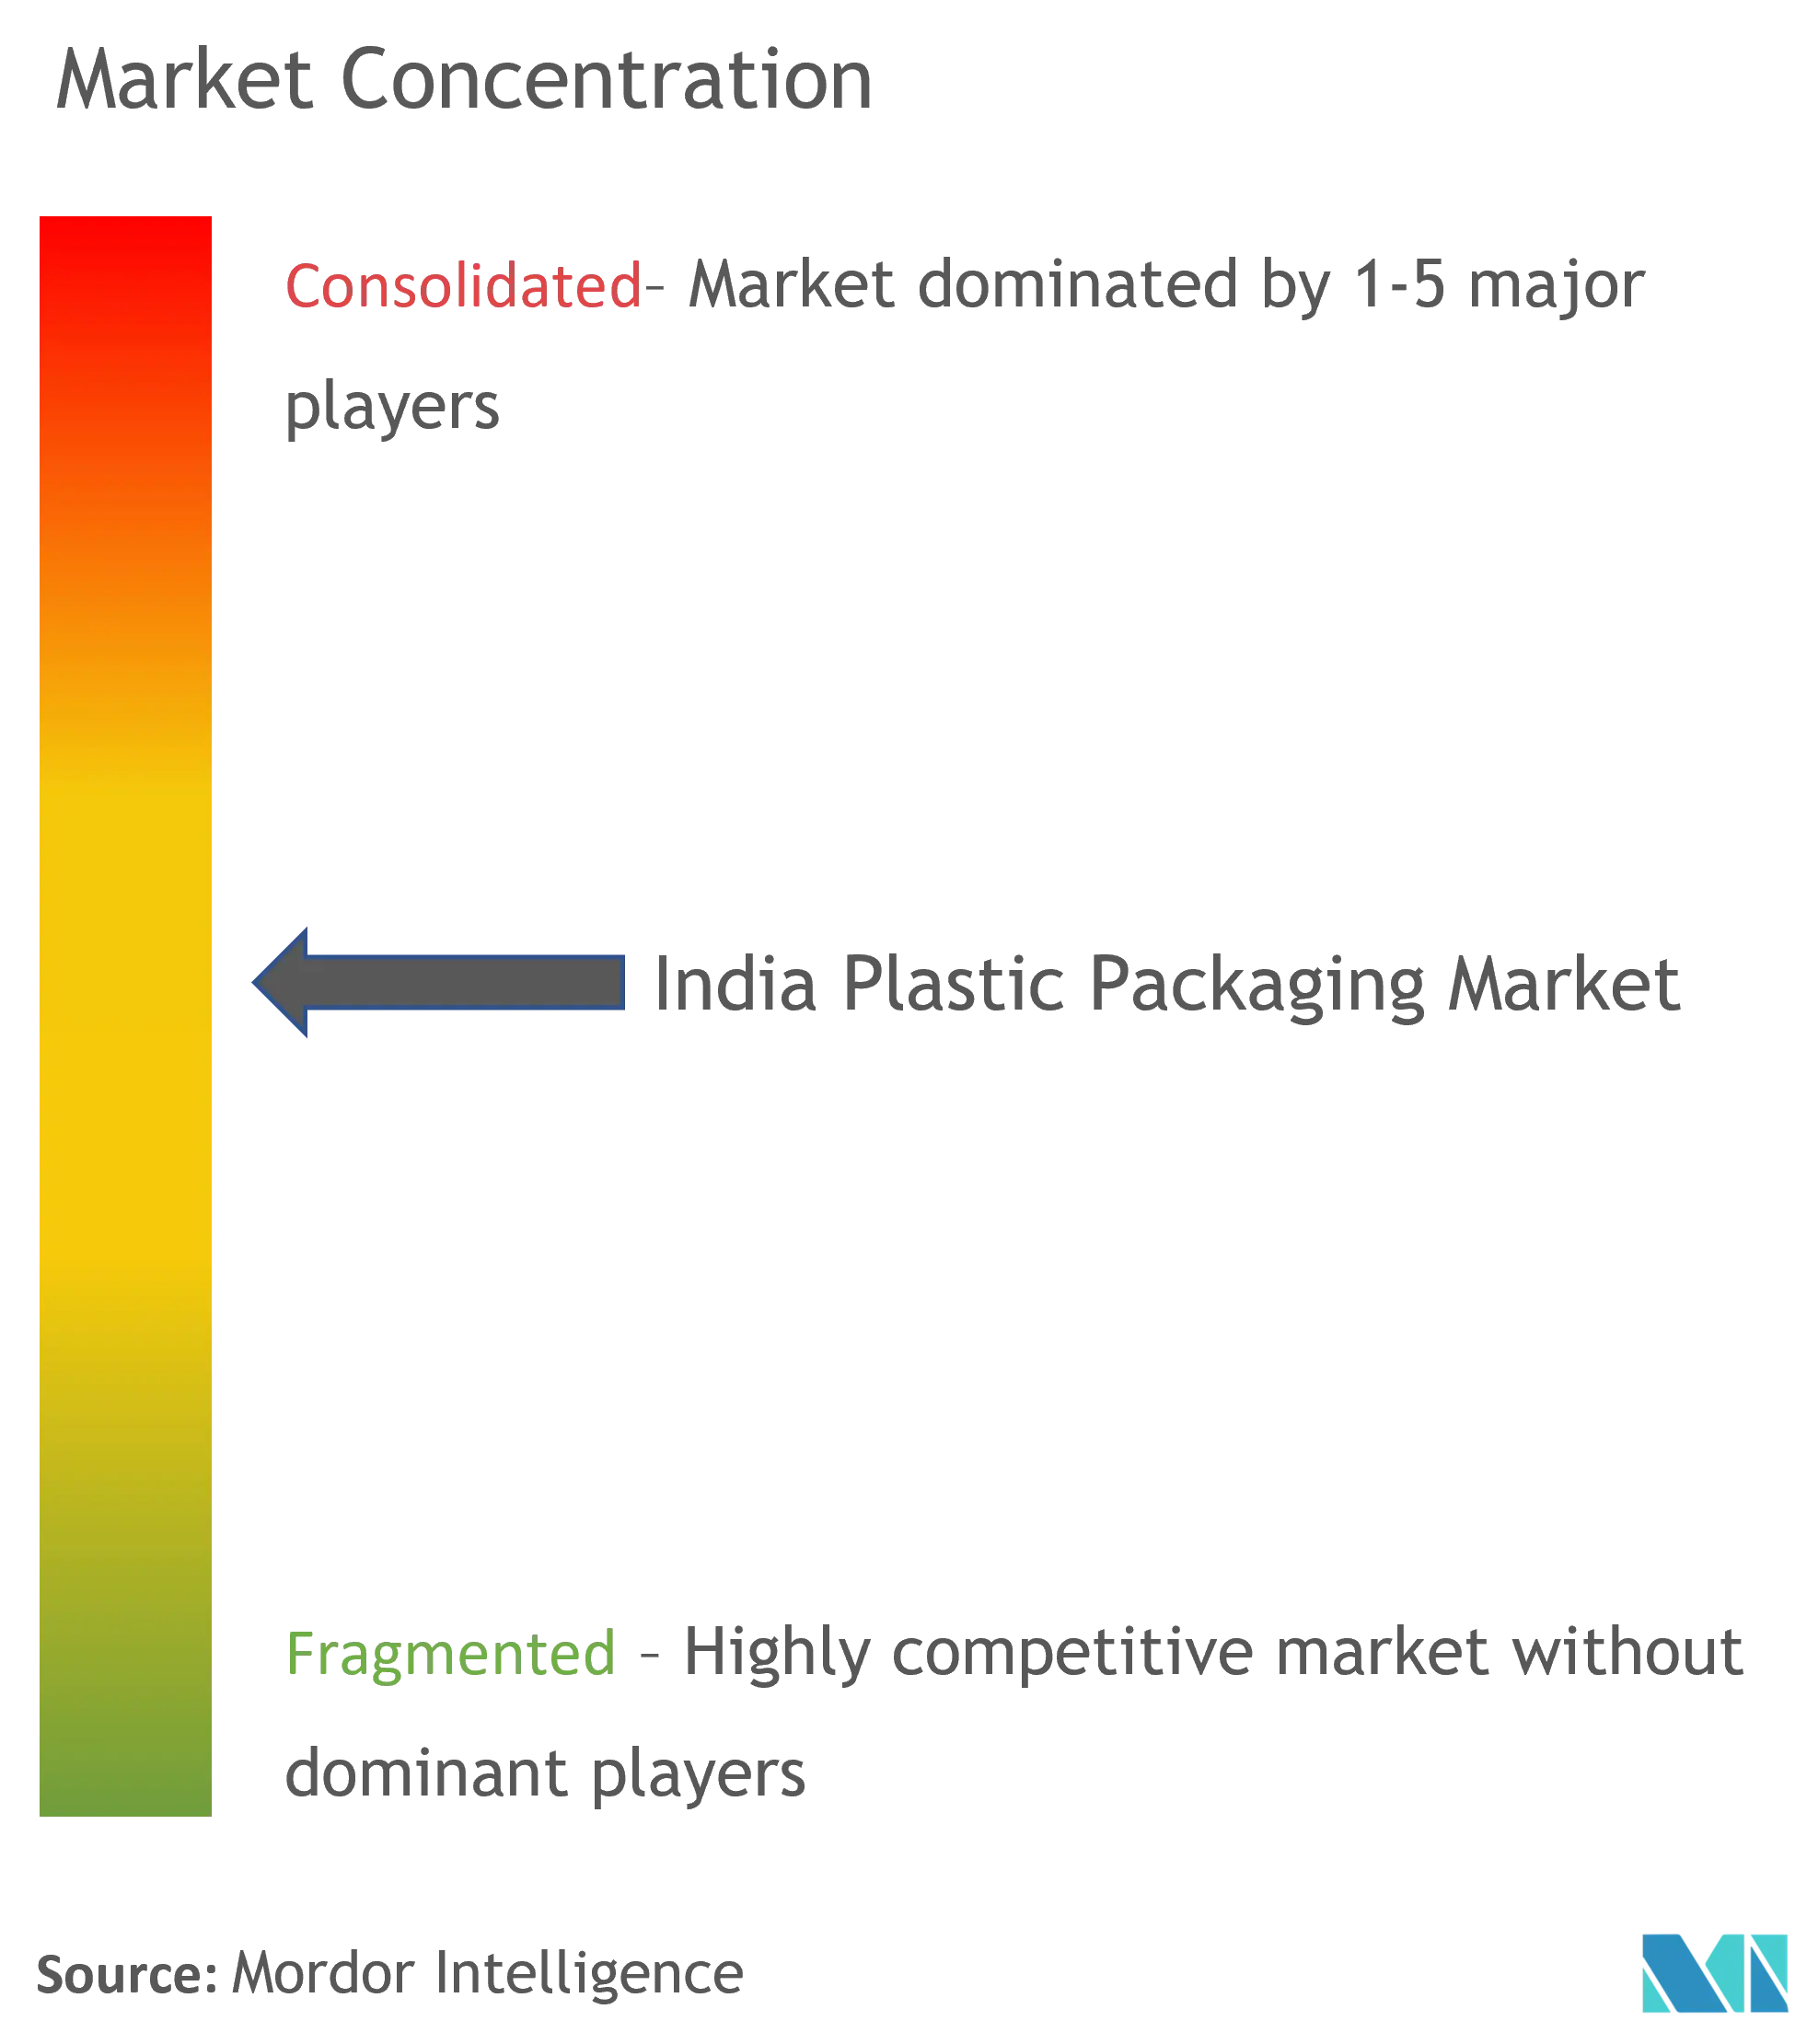 India Plastic Packaging Market Concentration